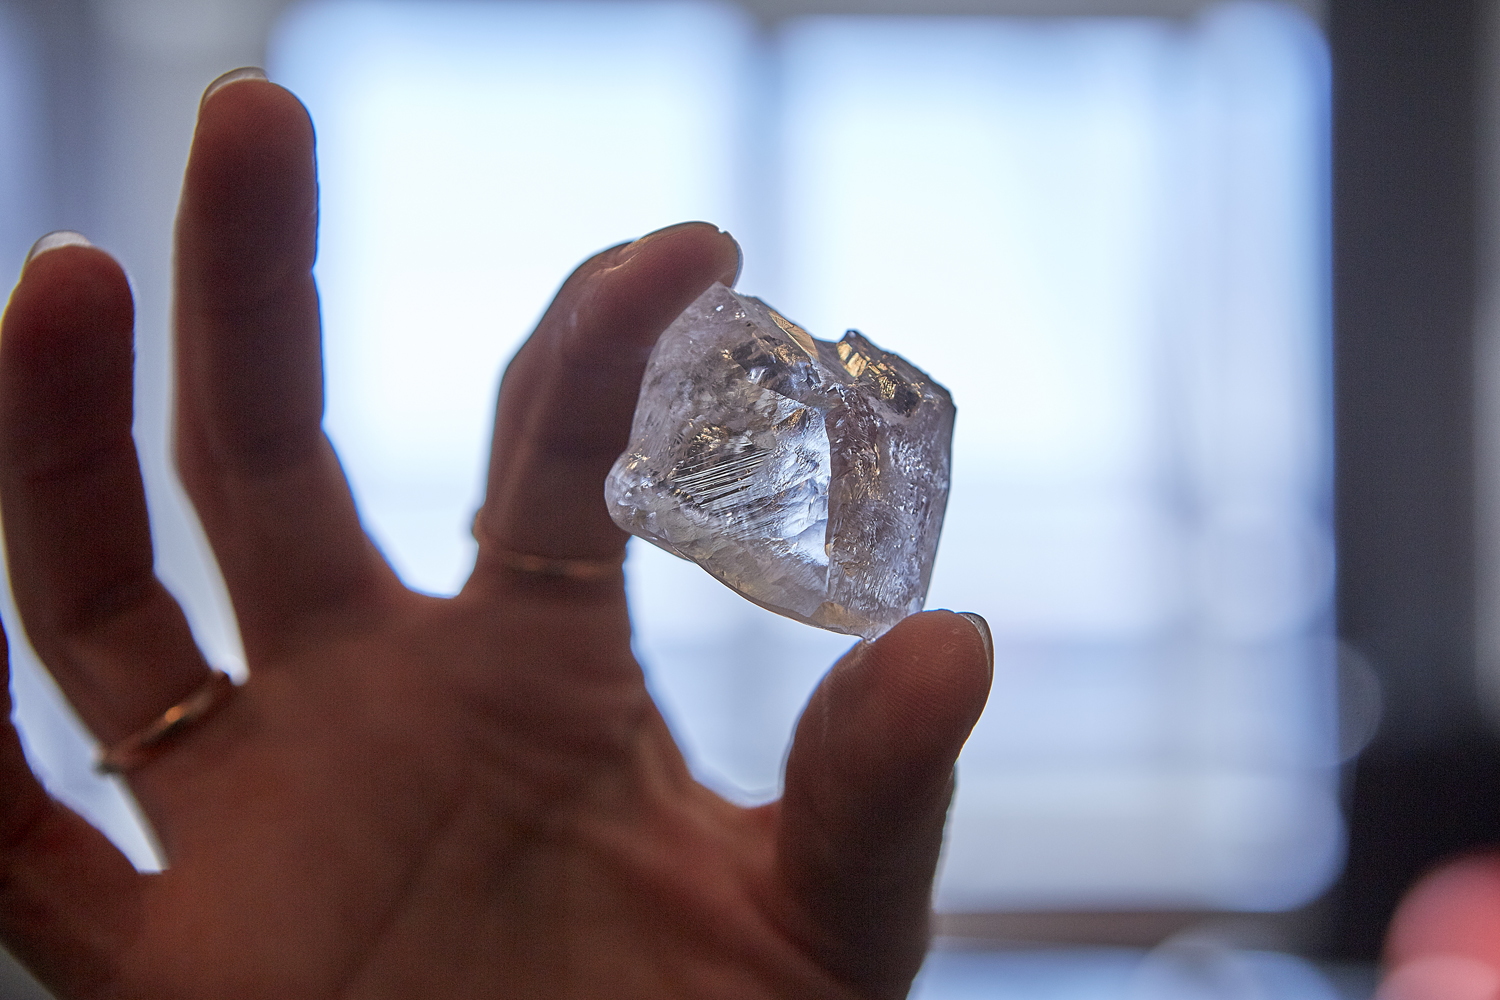 This is the largest diamond found in Western Yakutia.